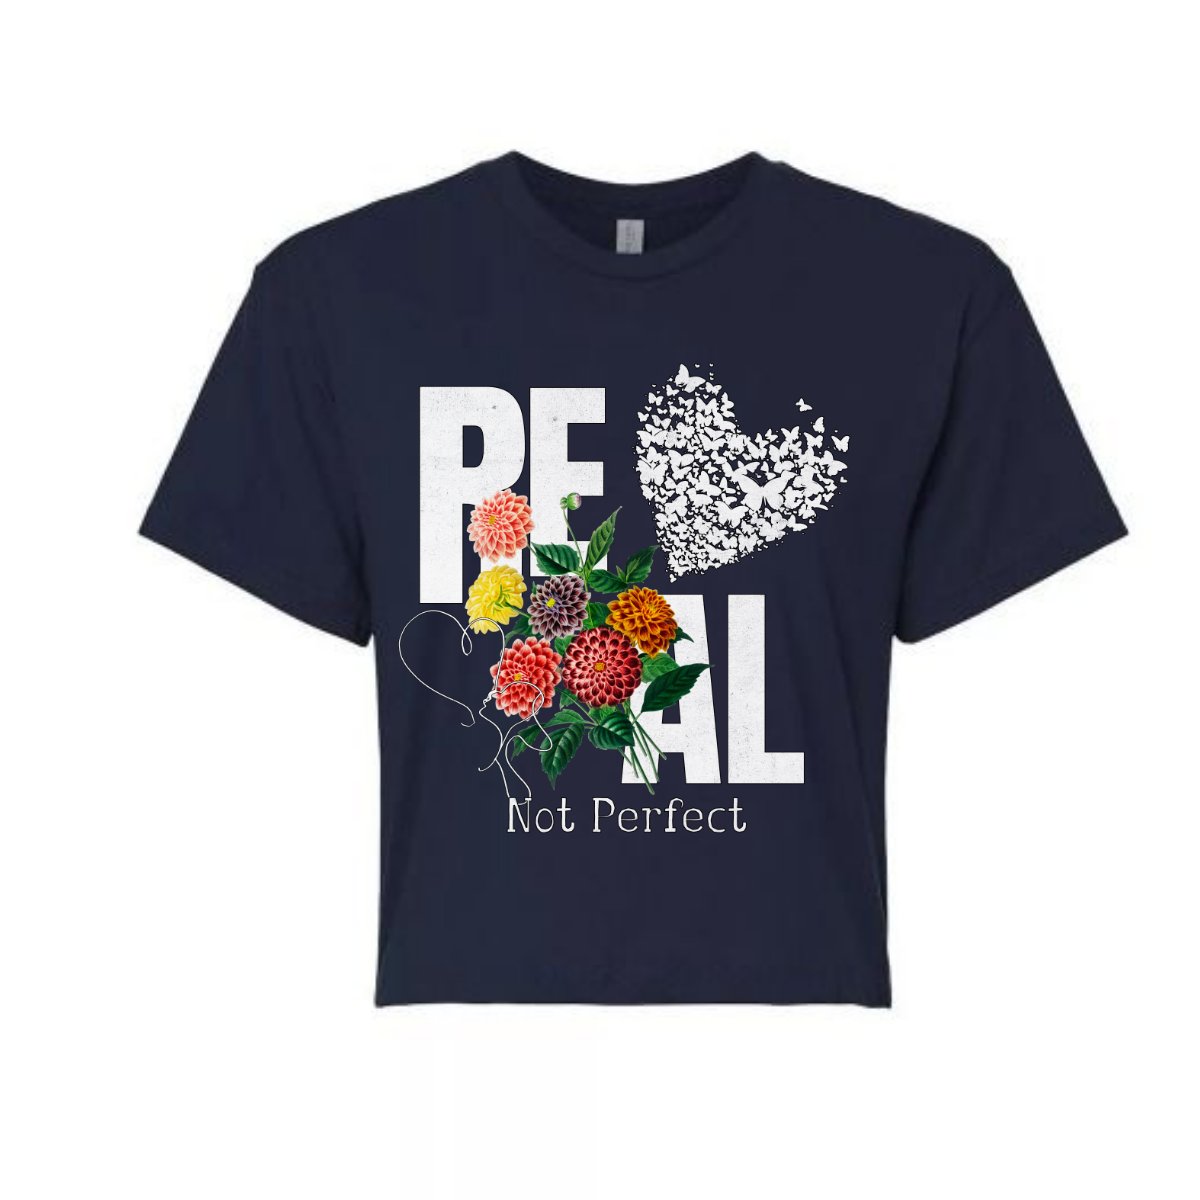 Real, Not Perfect Relaxed Fit Cropped Graphic T-shirt